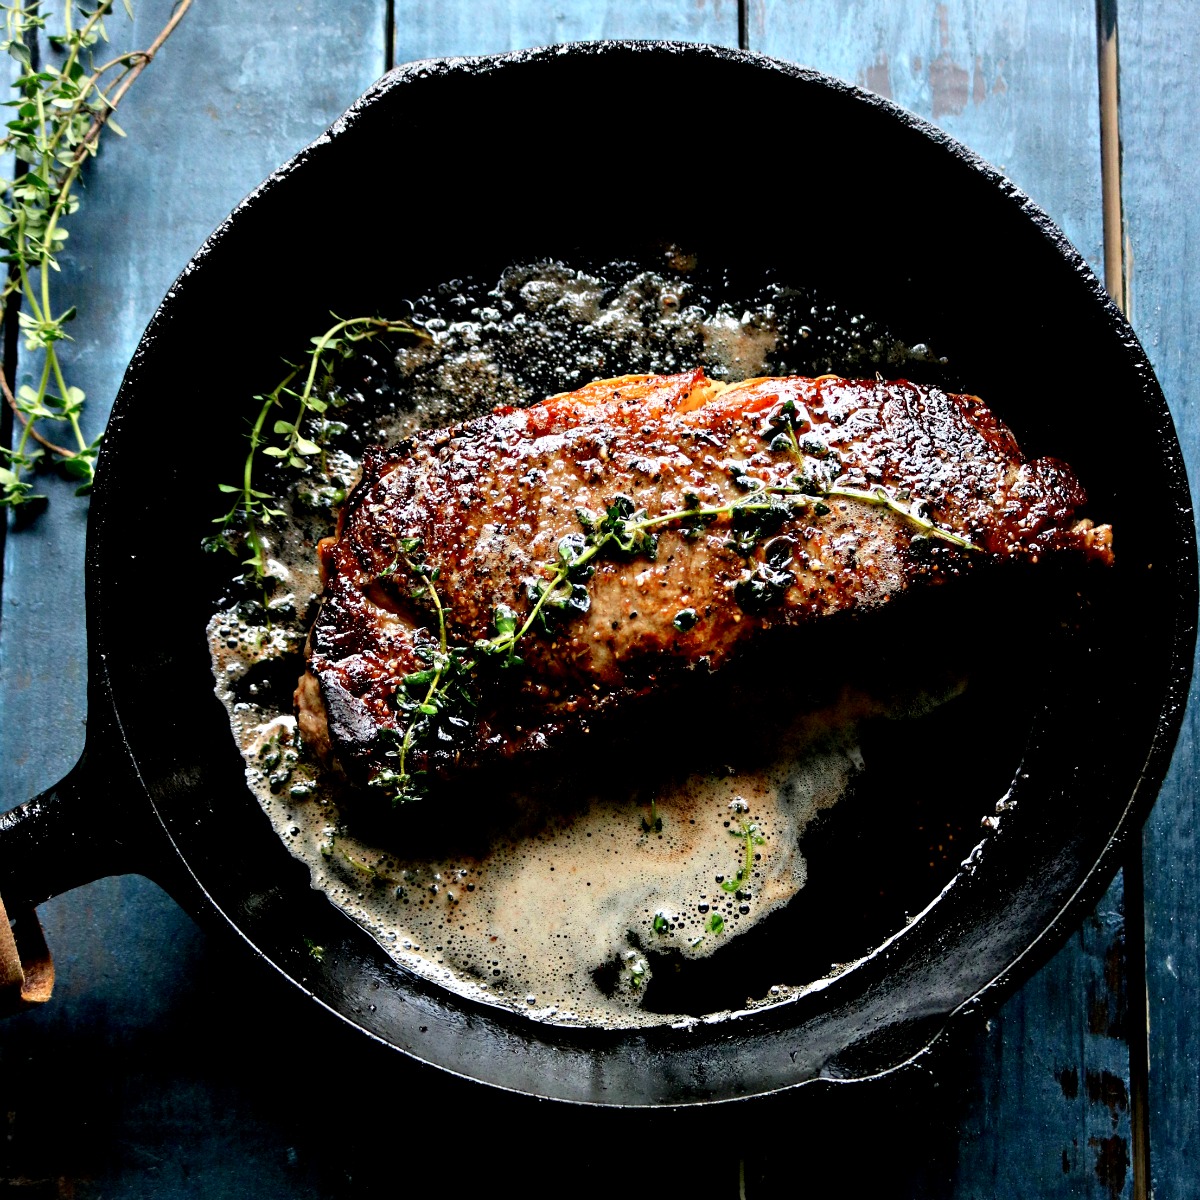 Perfect New York Strip Steak Recipe Pan Fried Oven Roasted